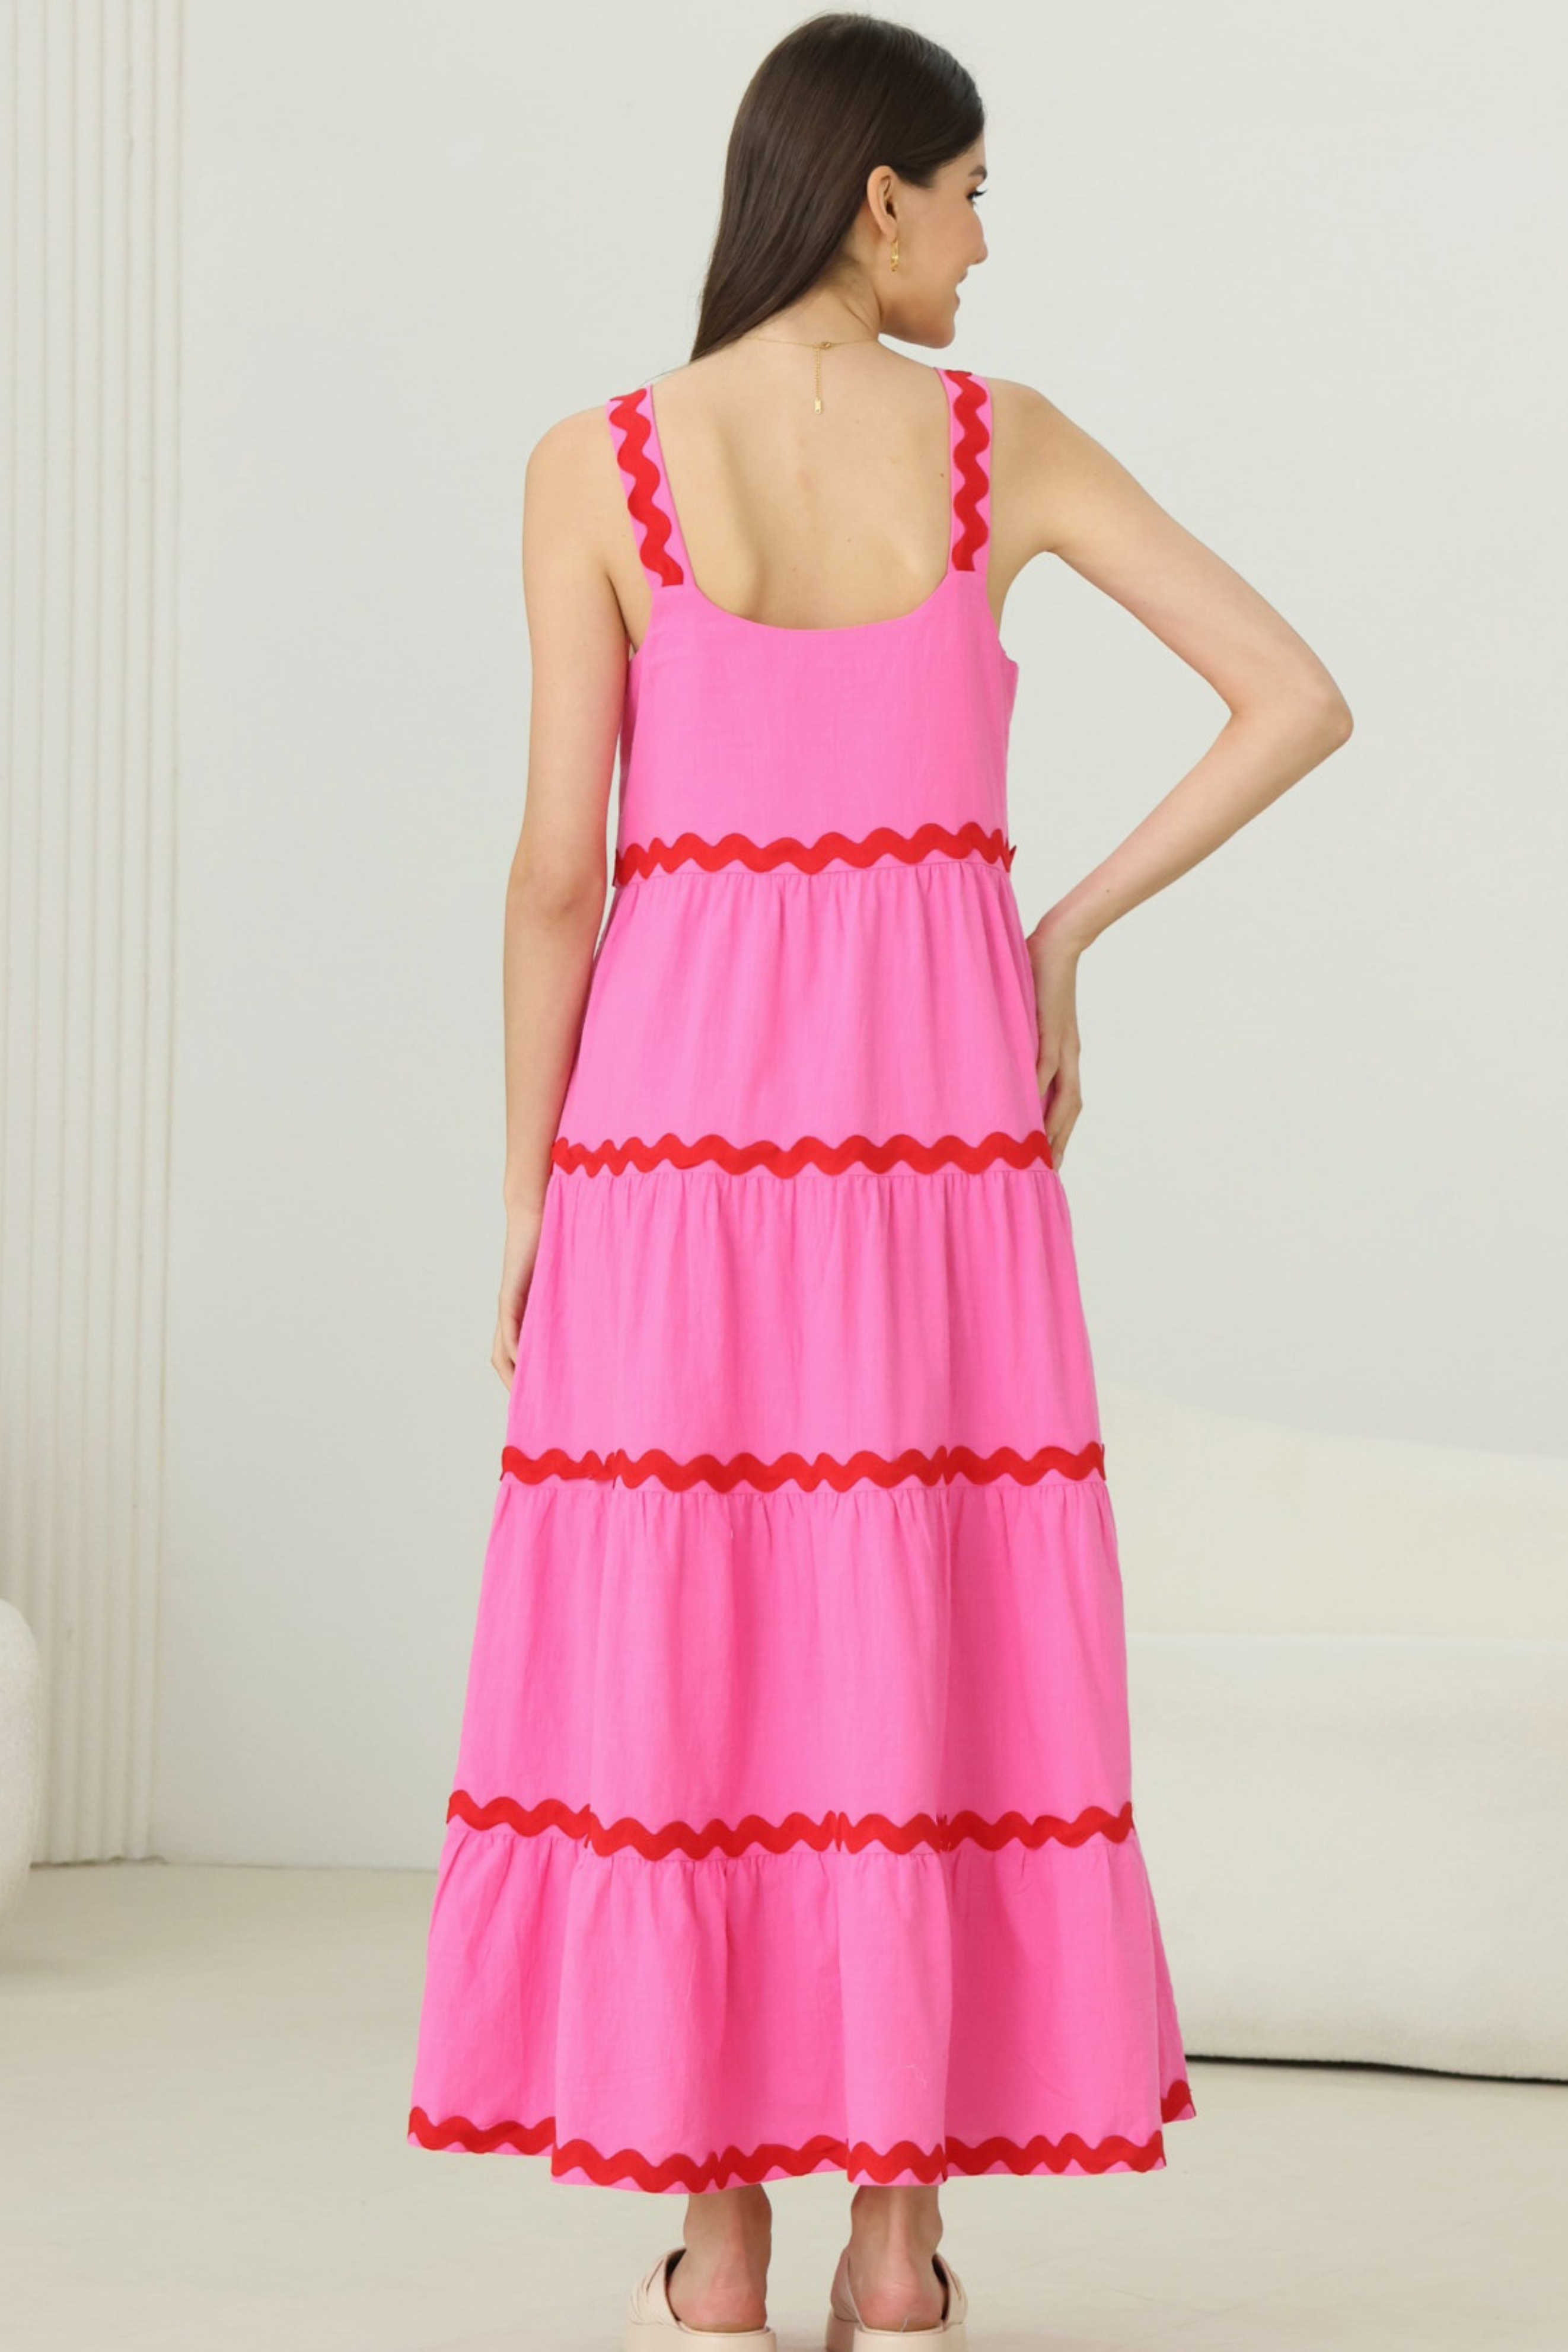 KIKI Maxi Dress in Pink and Red